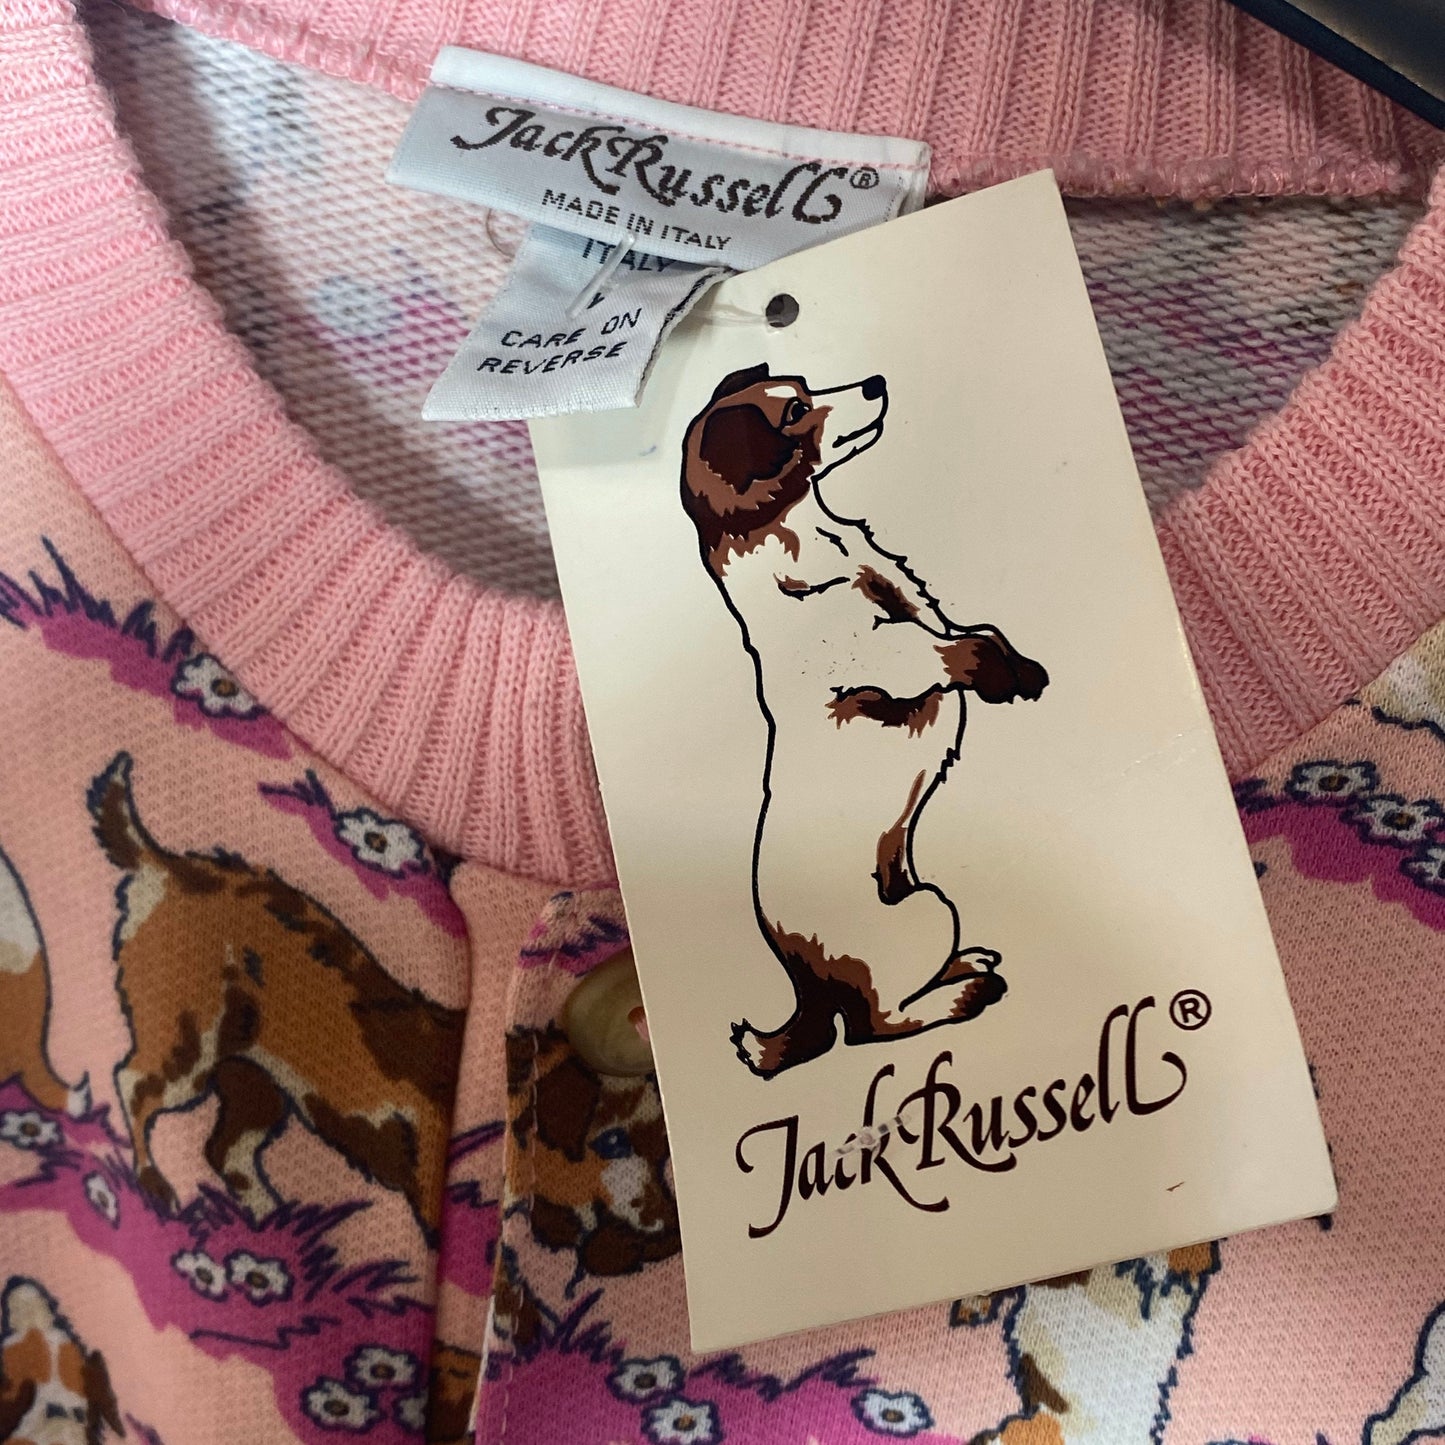 Jack russel dogs pink cotton allover print sweatshirt, size L, new with tags 1980s NOS